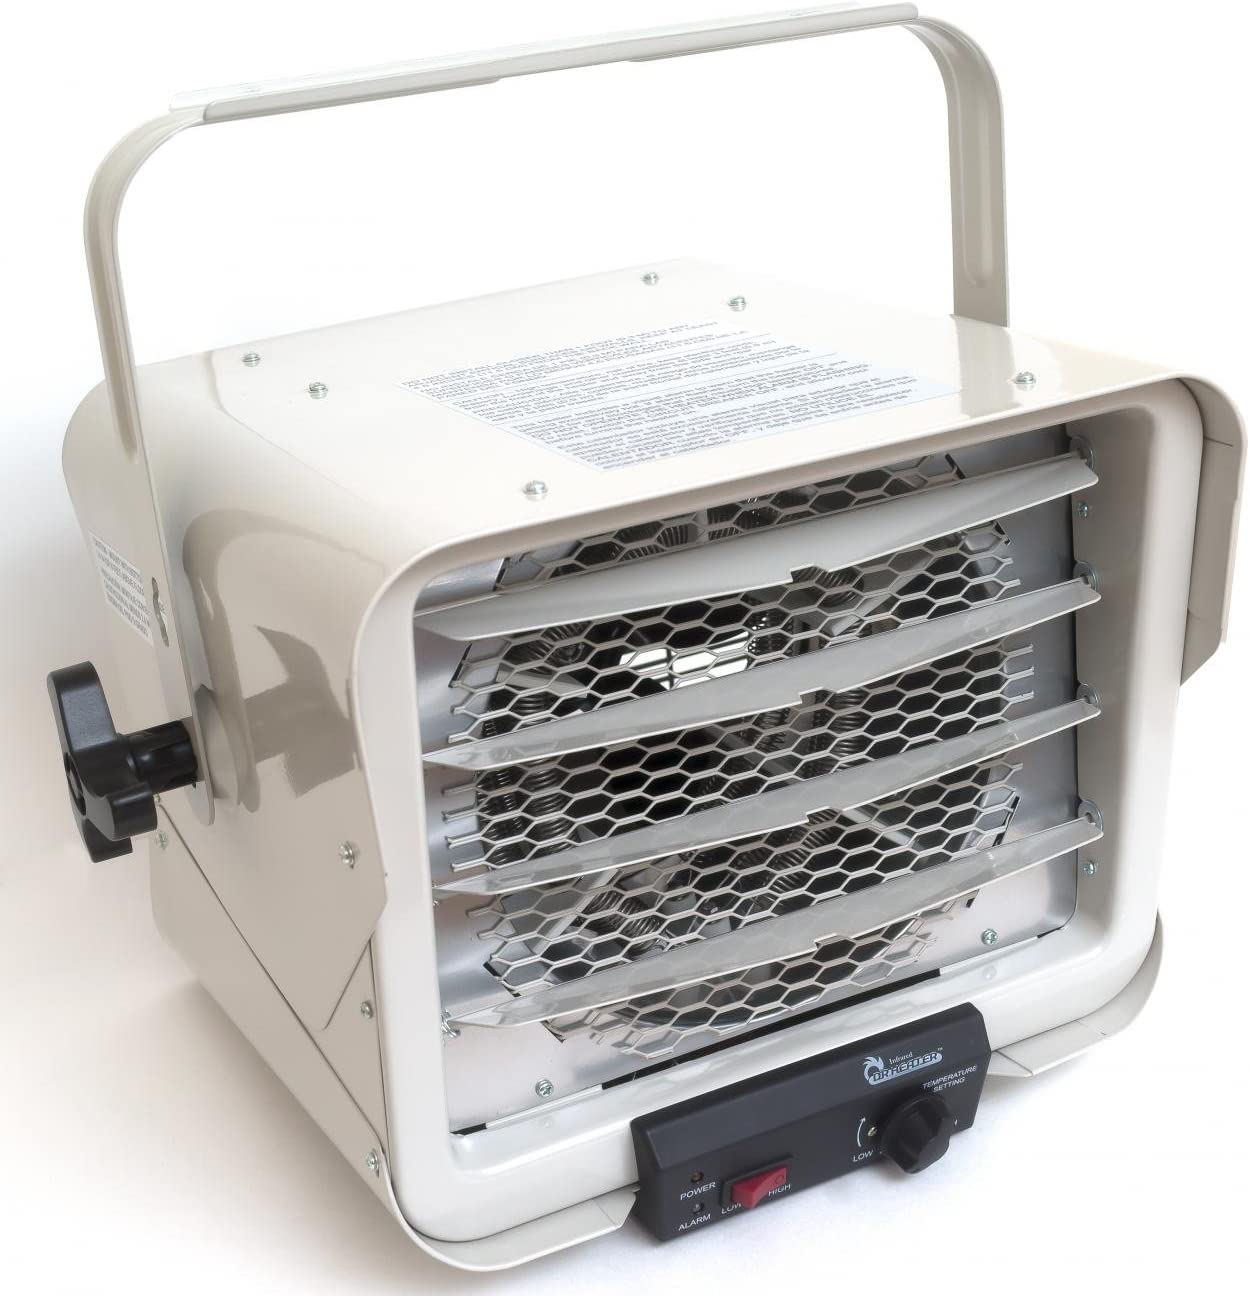 **Price Drop** Select Amazon Accounts: Dr. Heater DR966 240-Volt Hardwired 3000/6000-Watt Shop Garage Commercial Heater (Gray) $46.15 + Free Shipping